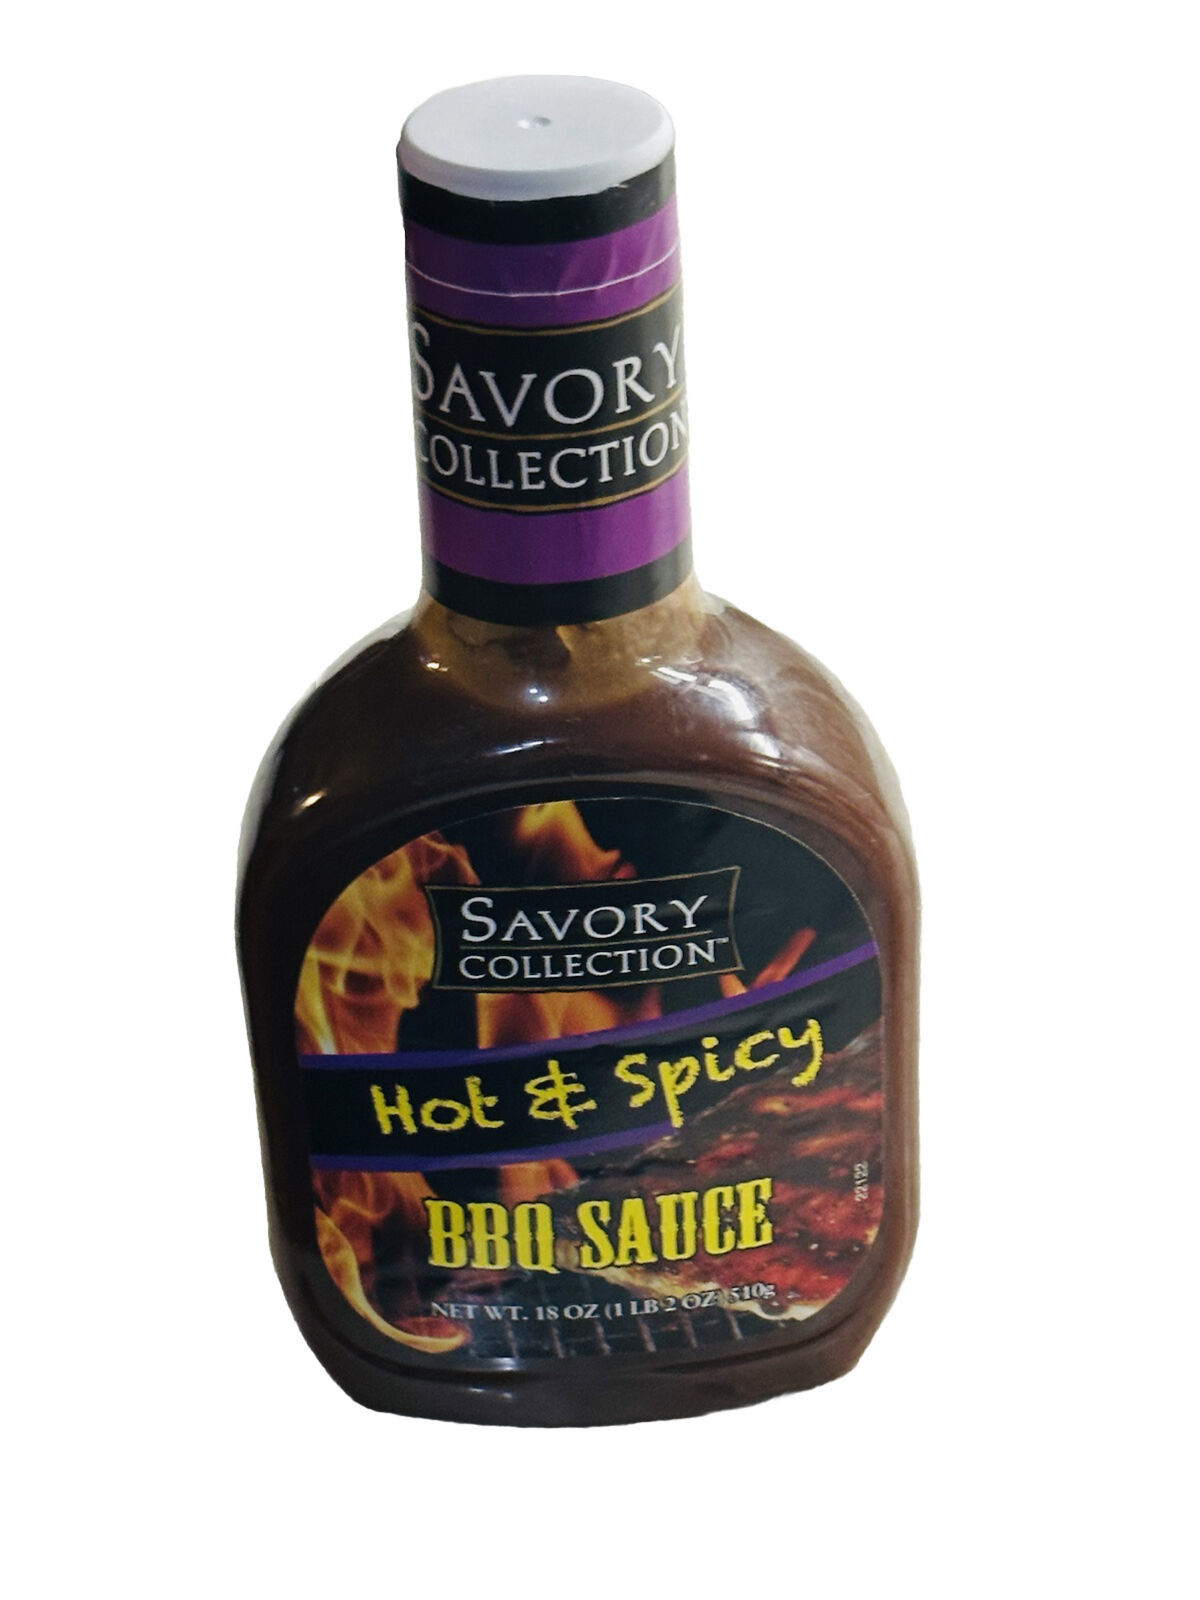 Savory Collection Hot/Spicy BBQ Sauce, 18 oz/1 Lb 2oz - $12.75